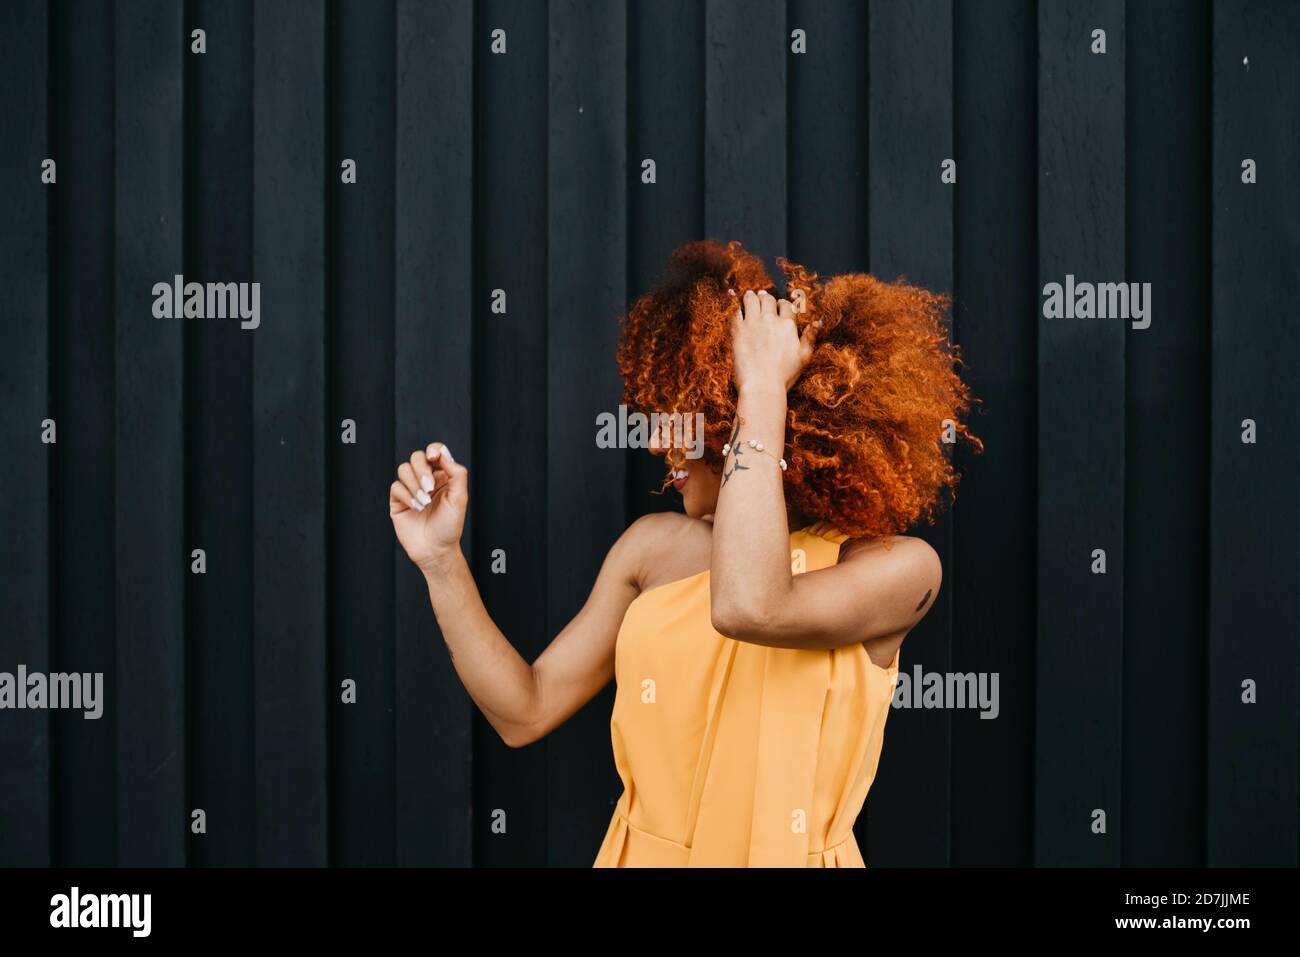 Cheerful young woman shaking hair while standing against wall Stock Photo